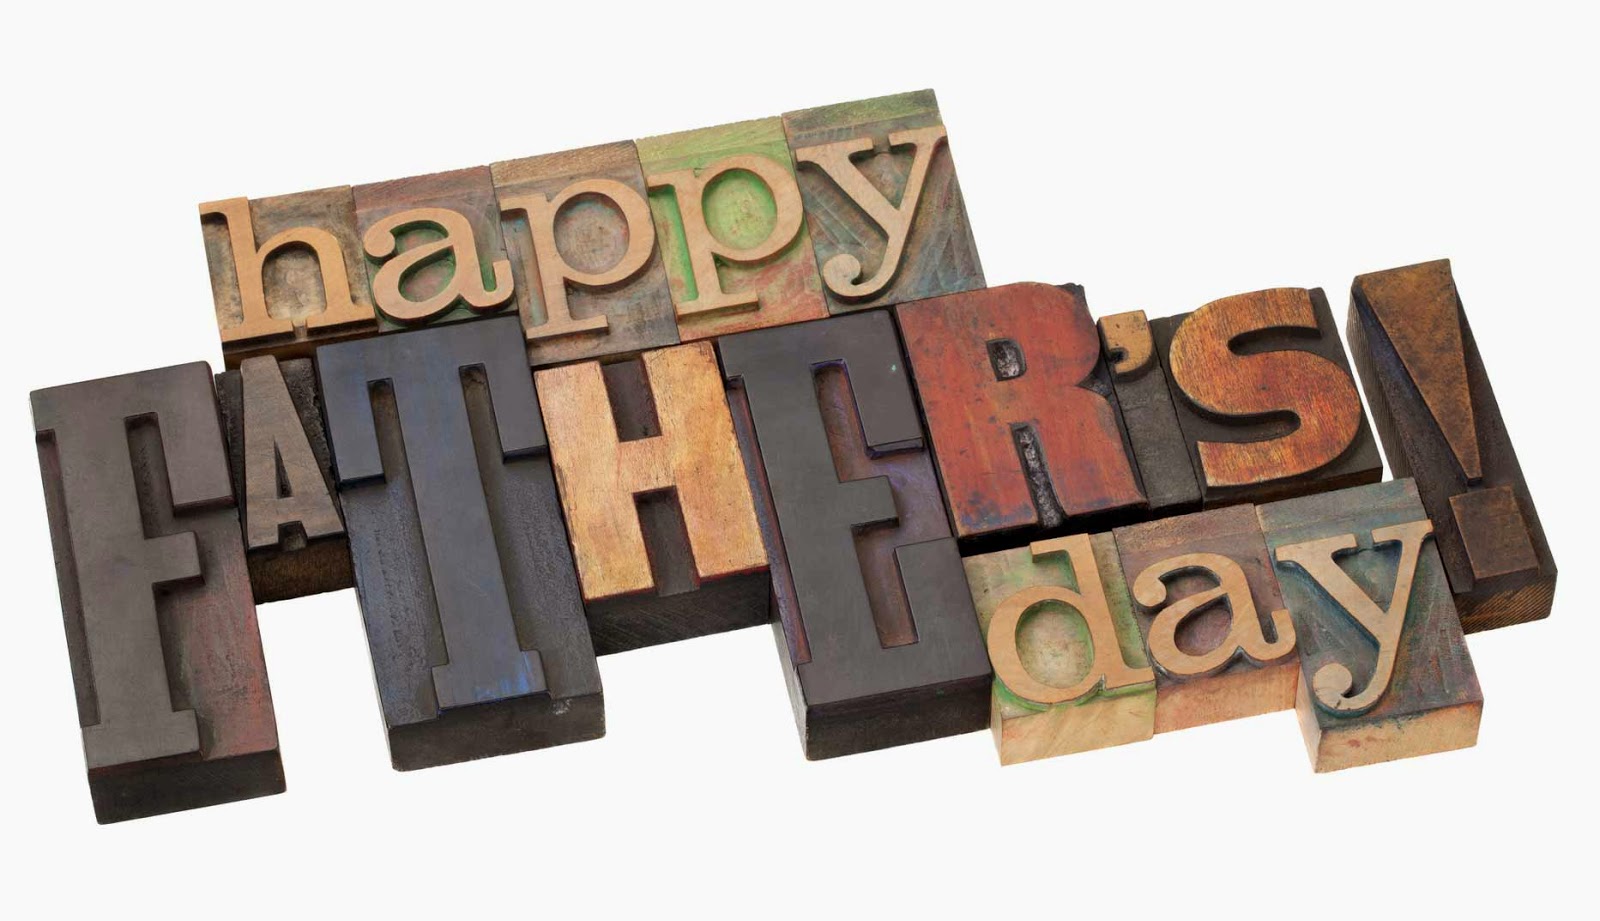 Happy-Fathers-Day-2014-Images-HD-Free1.jpg